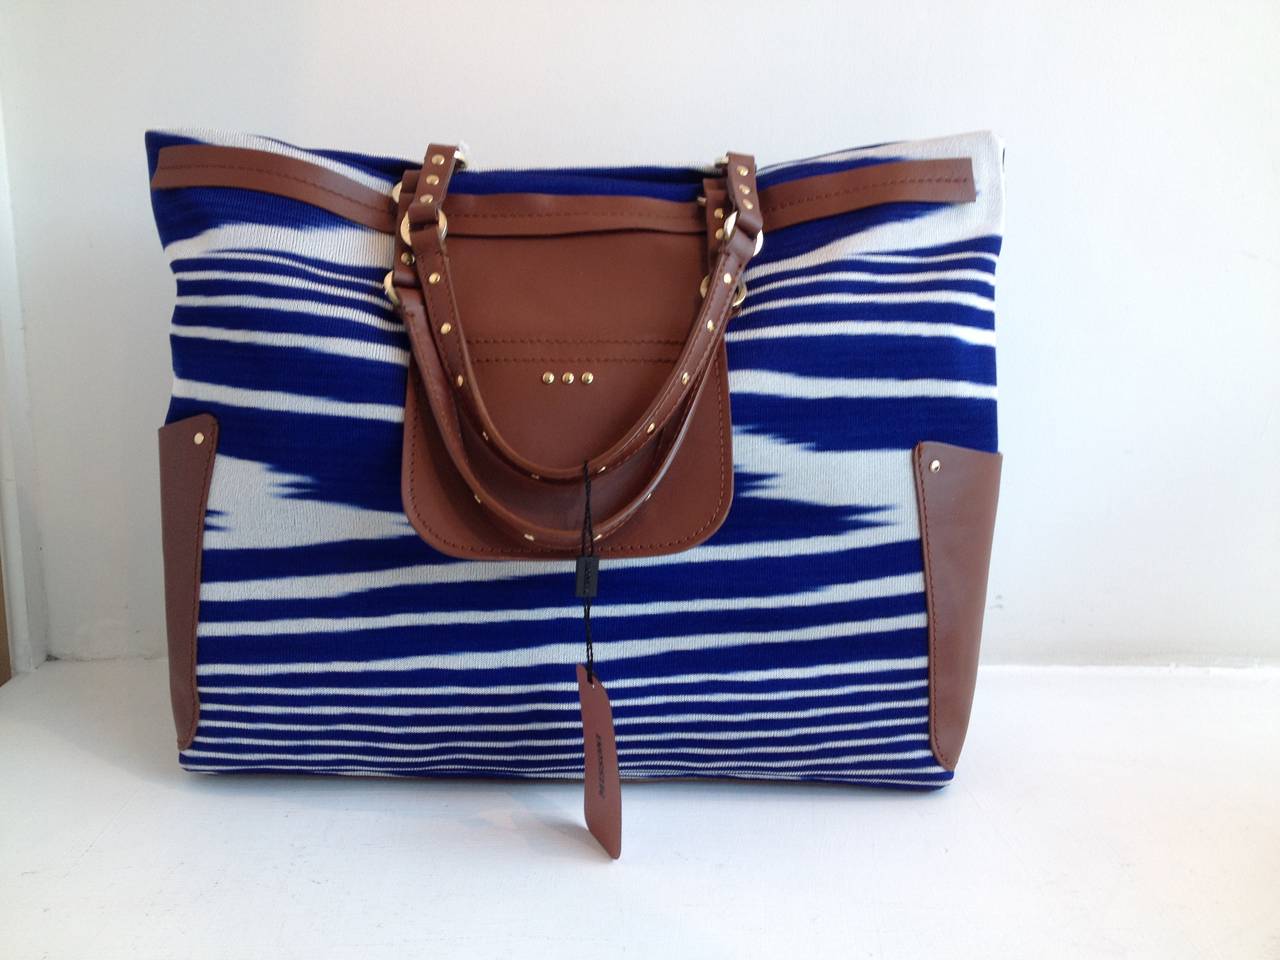 Women's Missoni Blue and White Striped Tote with Leather Trim